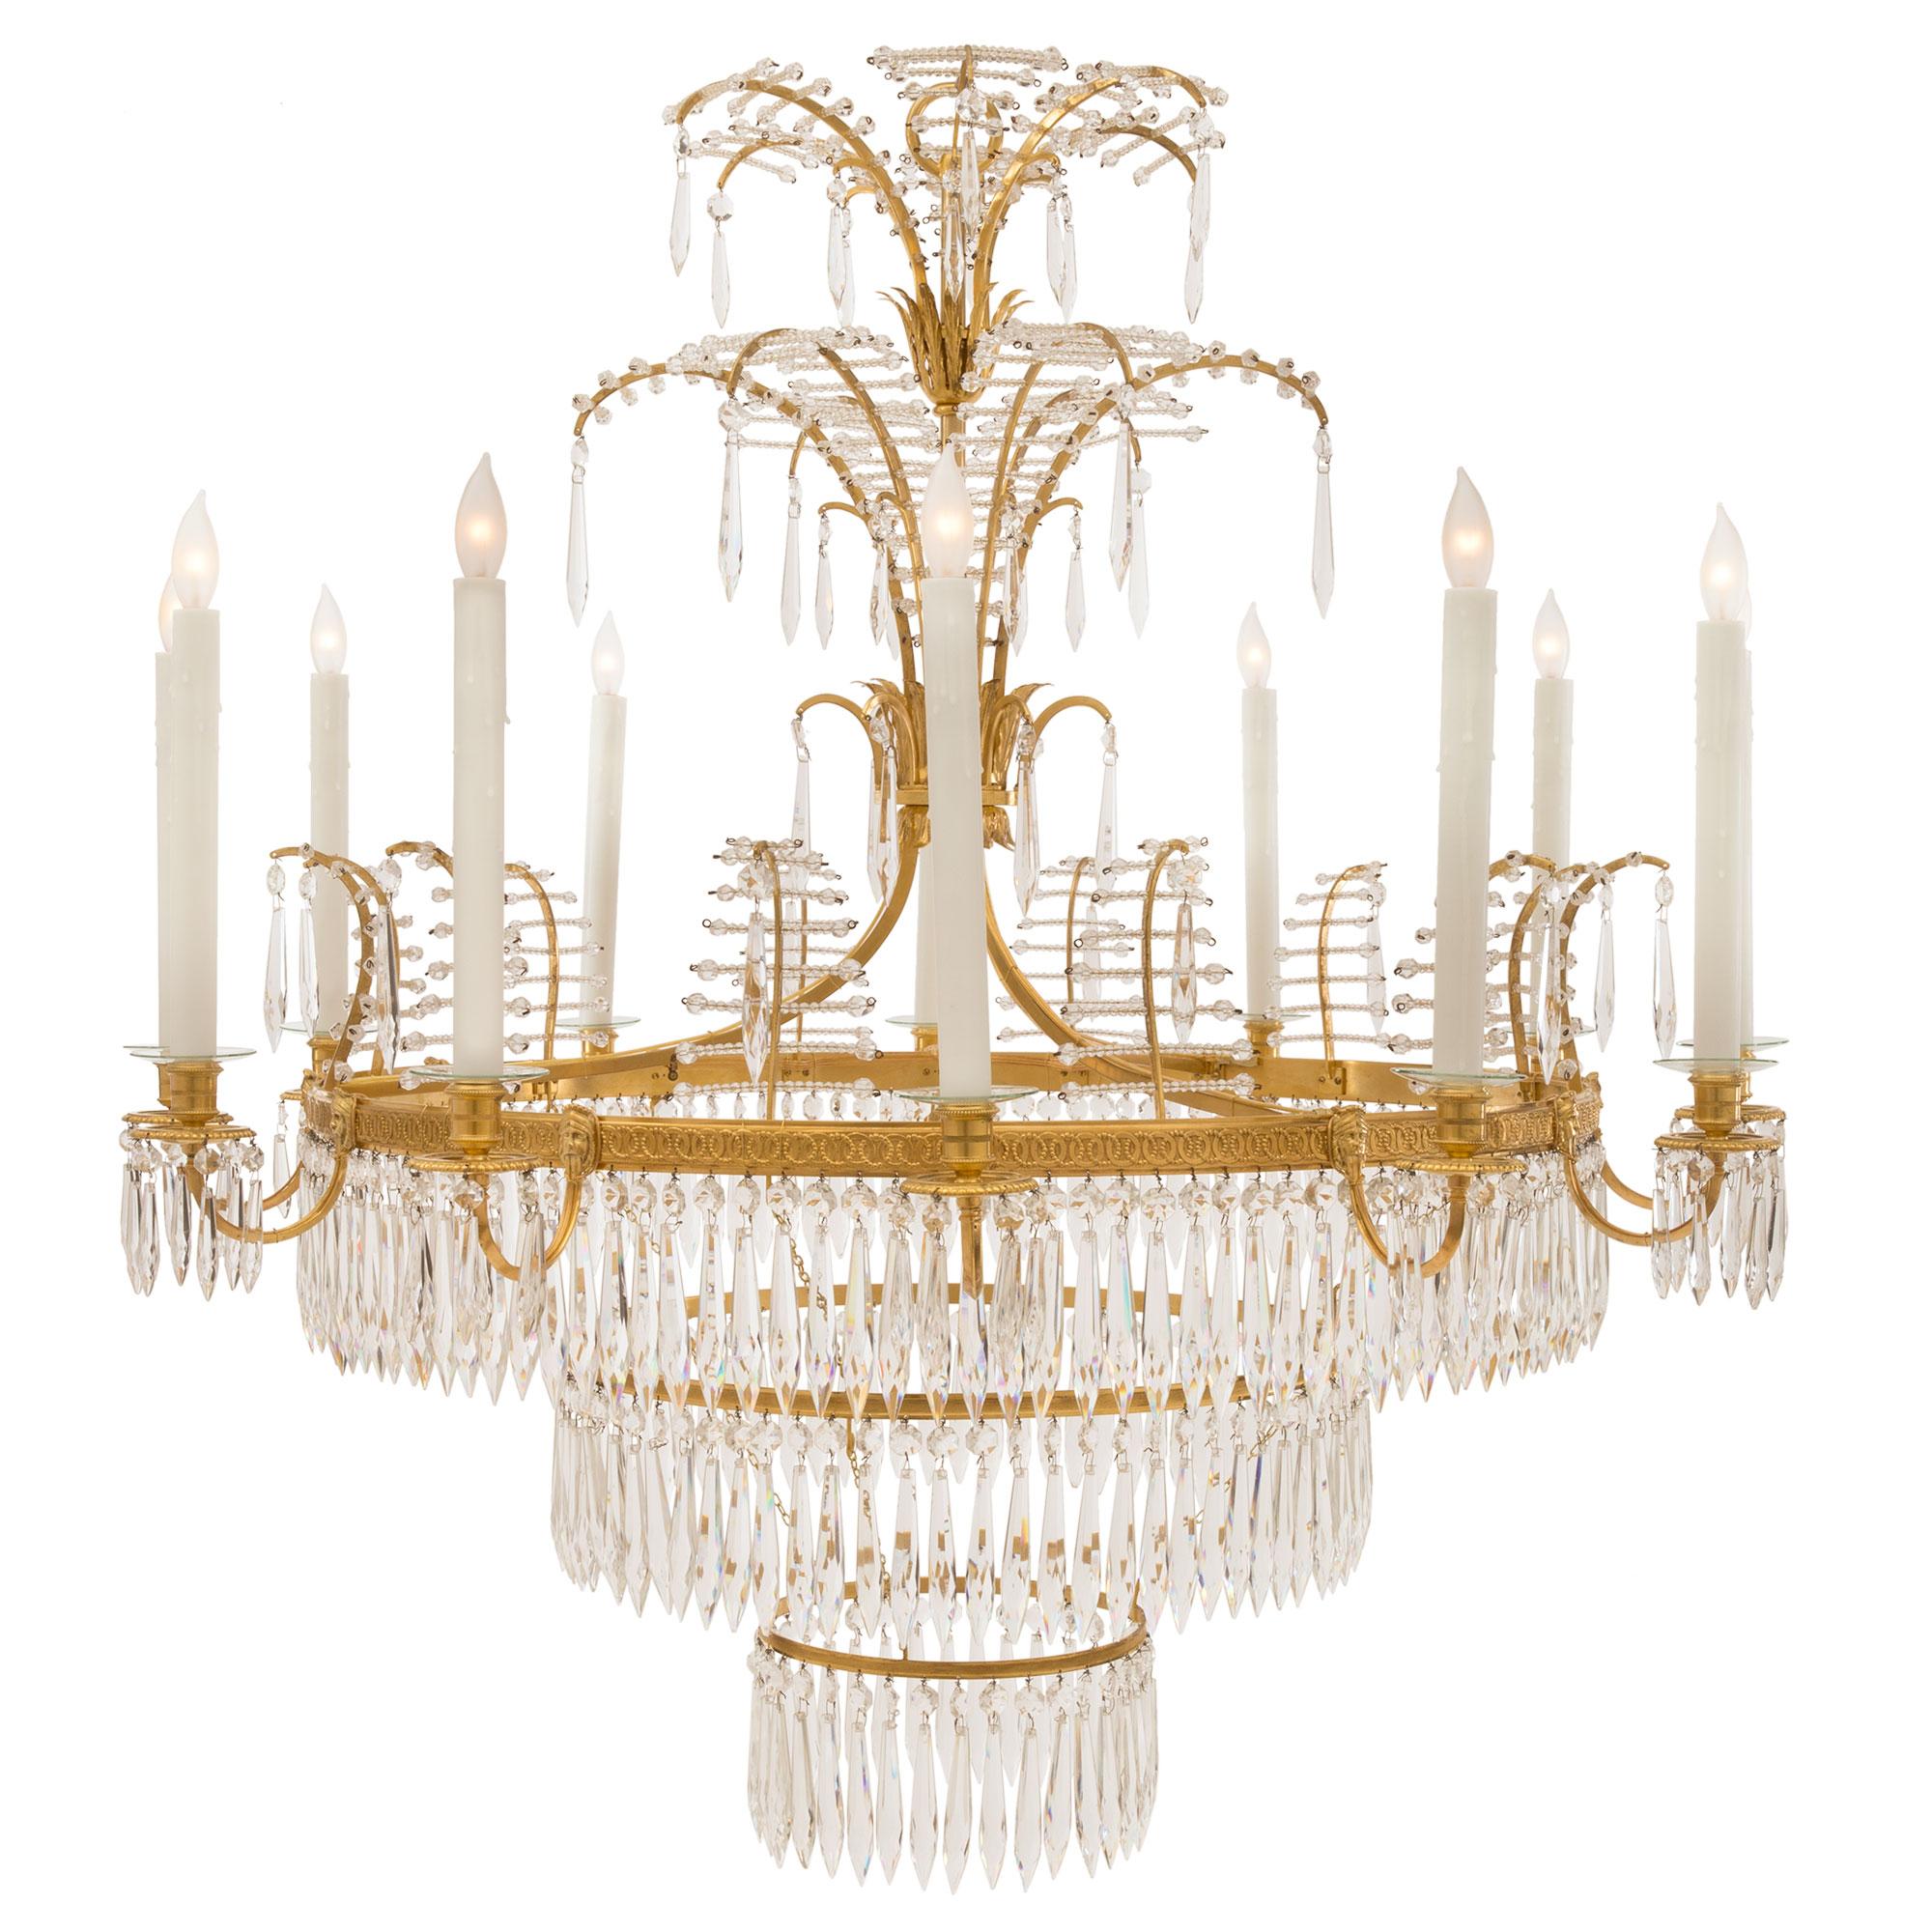 A stunning Russian early 19th century neo-classical st. ormolu and crystal chandelier. The ten arm chandelier is centered by an elegant stepped design with three circular hanging tiers adorned with fine prism shaped cut crystal pendants. The central